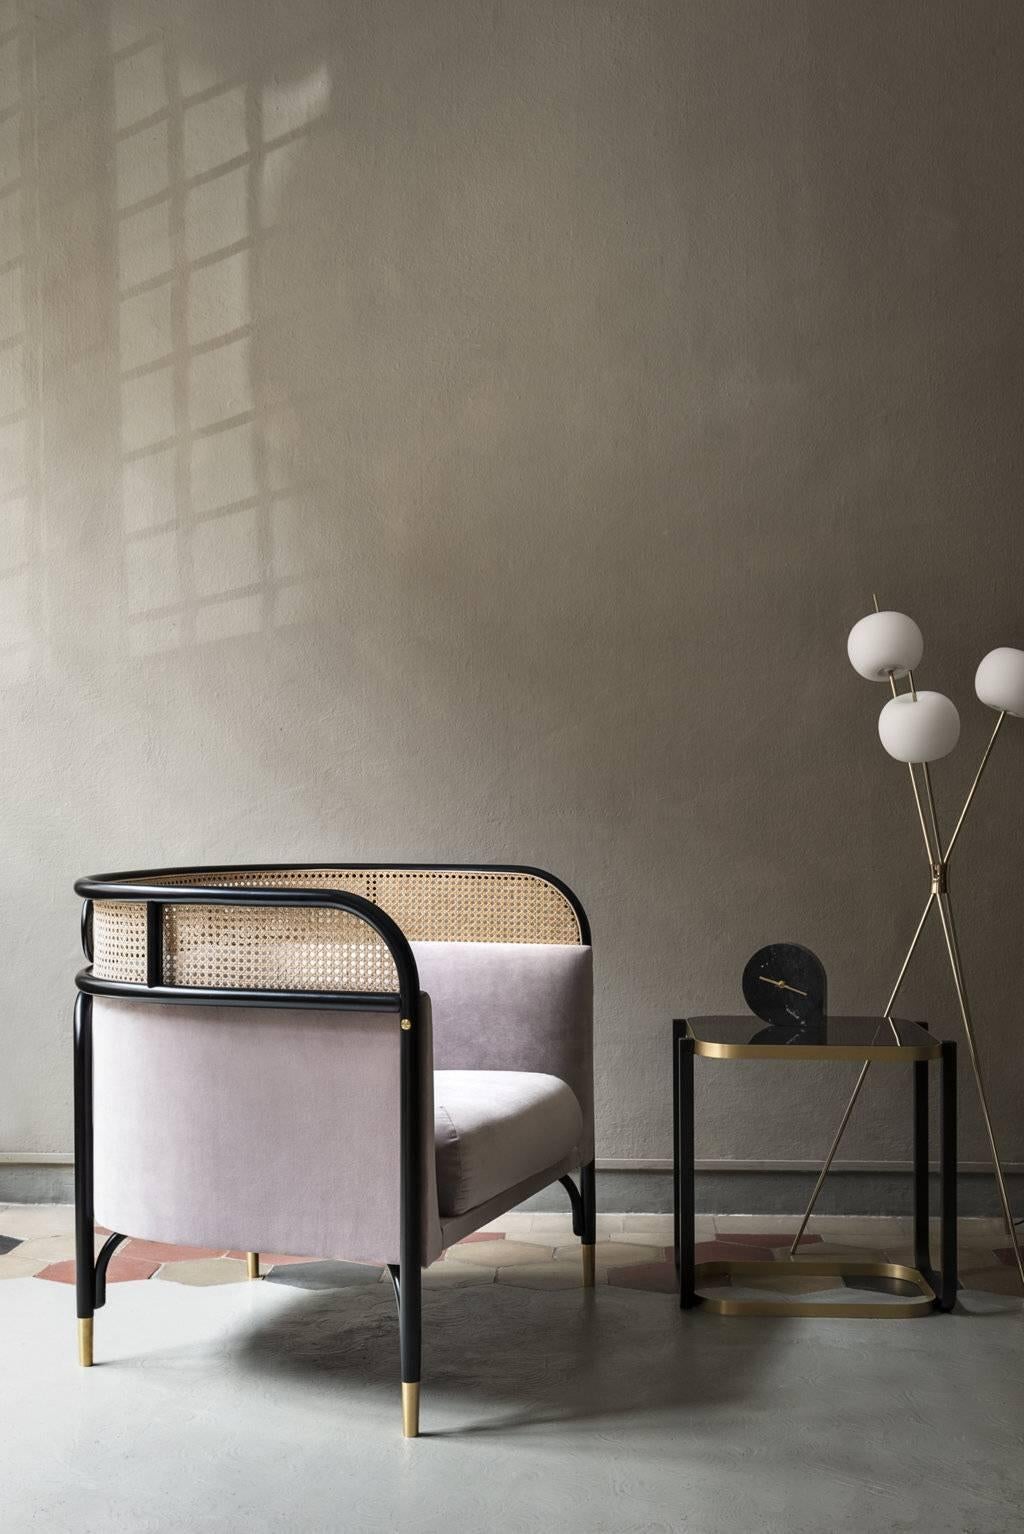 Wiener GTV Design's collection of upholstery suggests a new concept of comfort designed by GamFratesi, the Italian-Danish designer duo Stine Gam and Enrico Fratesi. Targa is a family consisting of an elegant two-seater sofa and an armchair, two